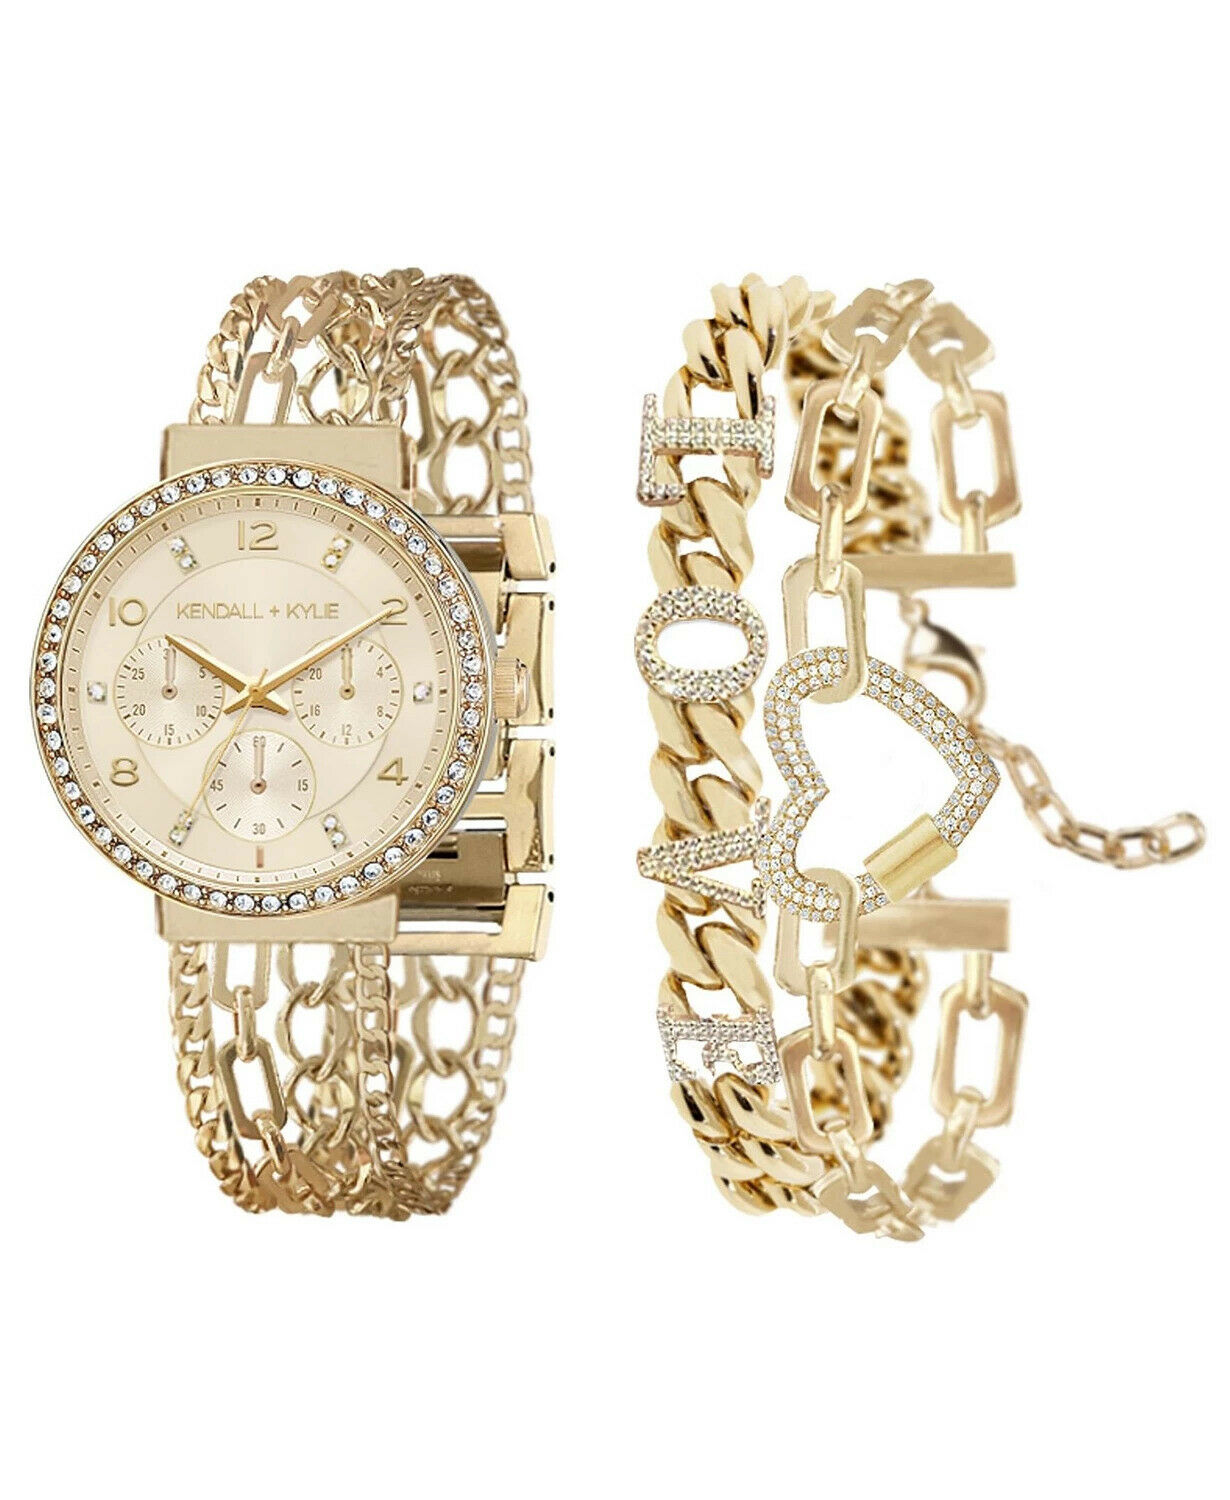 Kendall + Kylie: Two-Tone Gold/White Crystal 'LOVE' Watch and Bracelet Set A0372